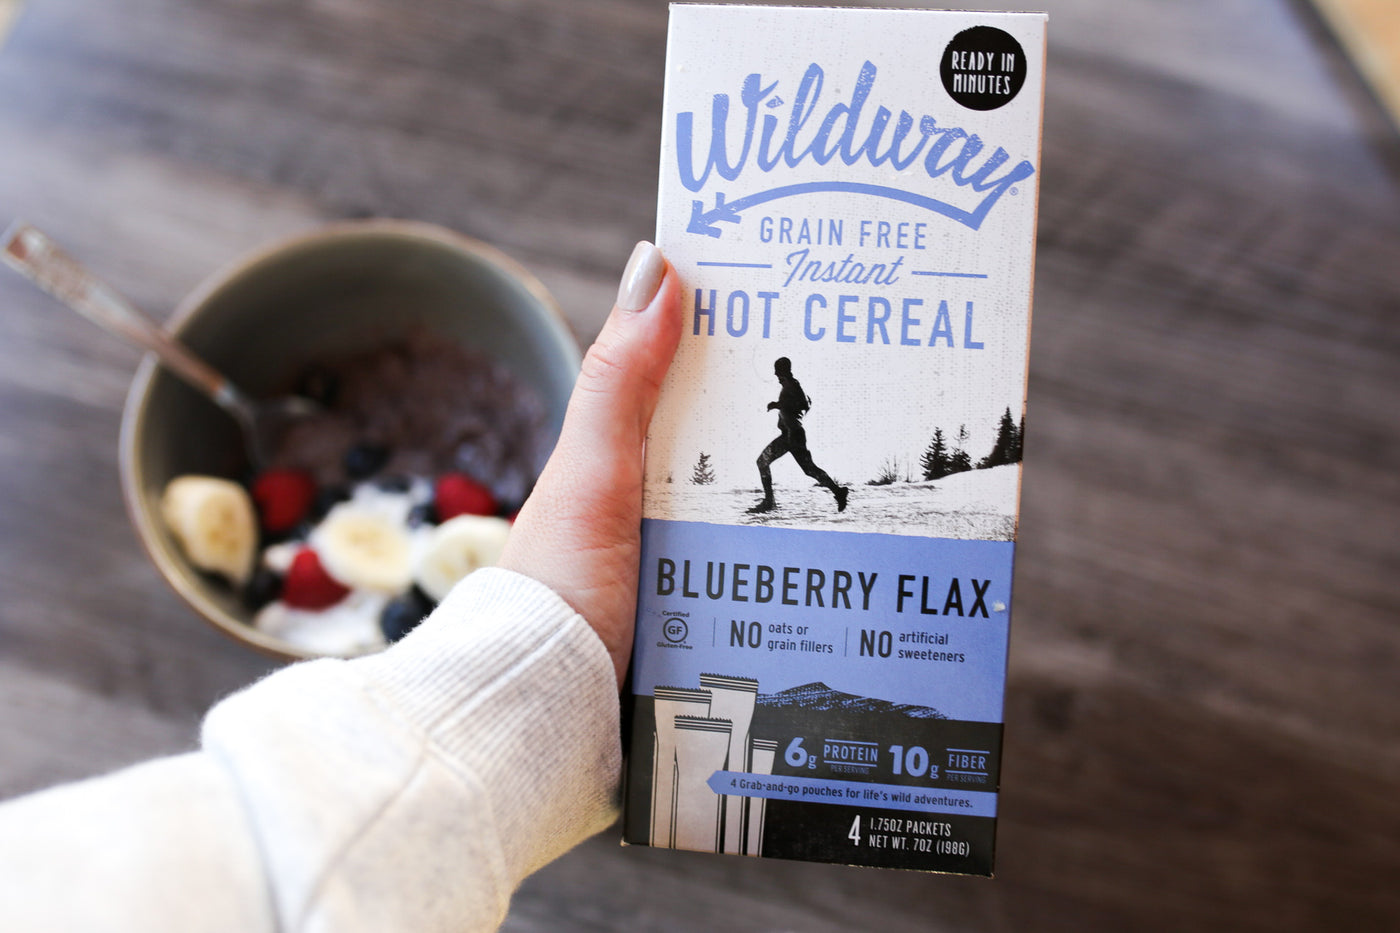 Grain-free Instant Keto Hot Cereal: Blueberry Flax, 7oz